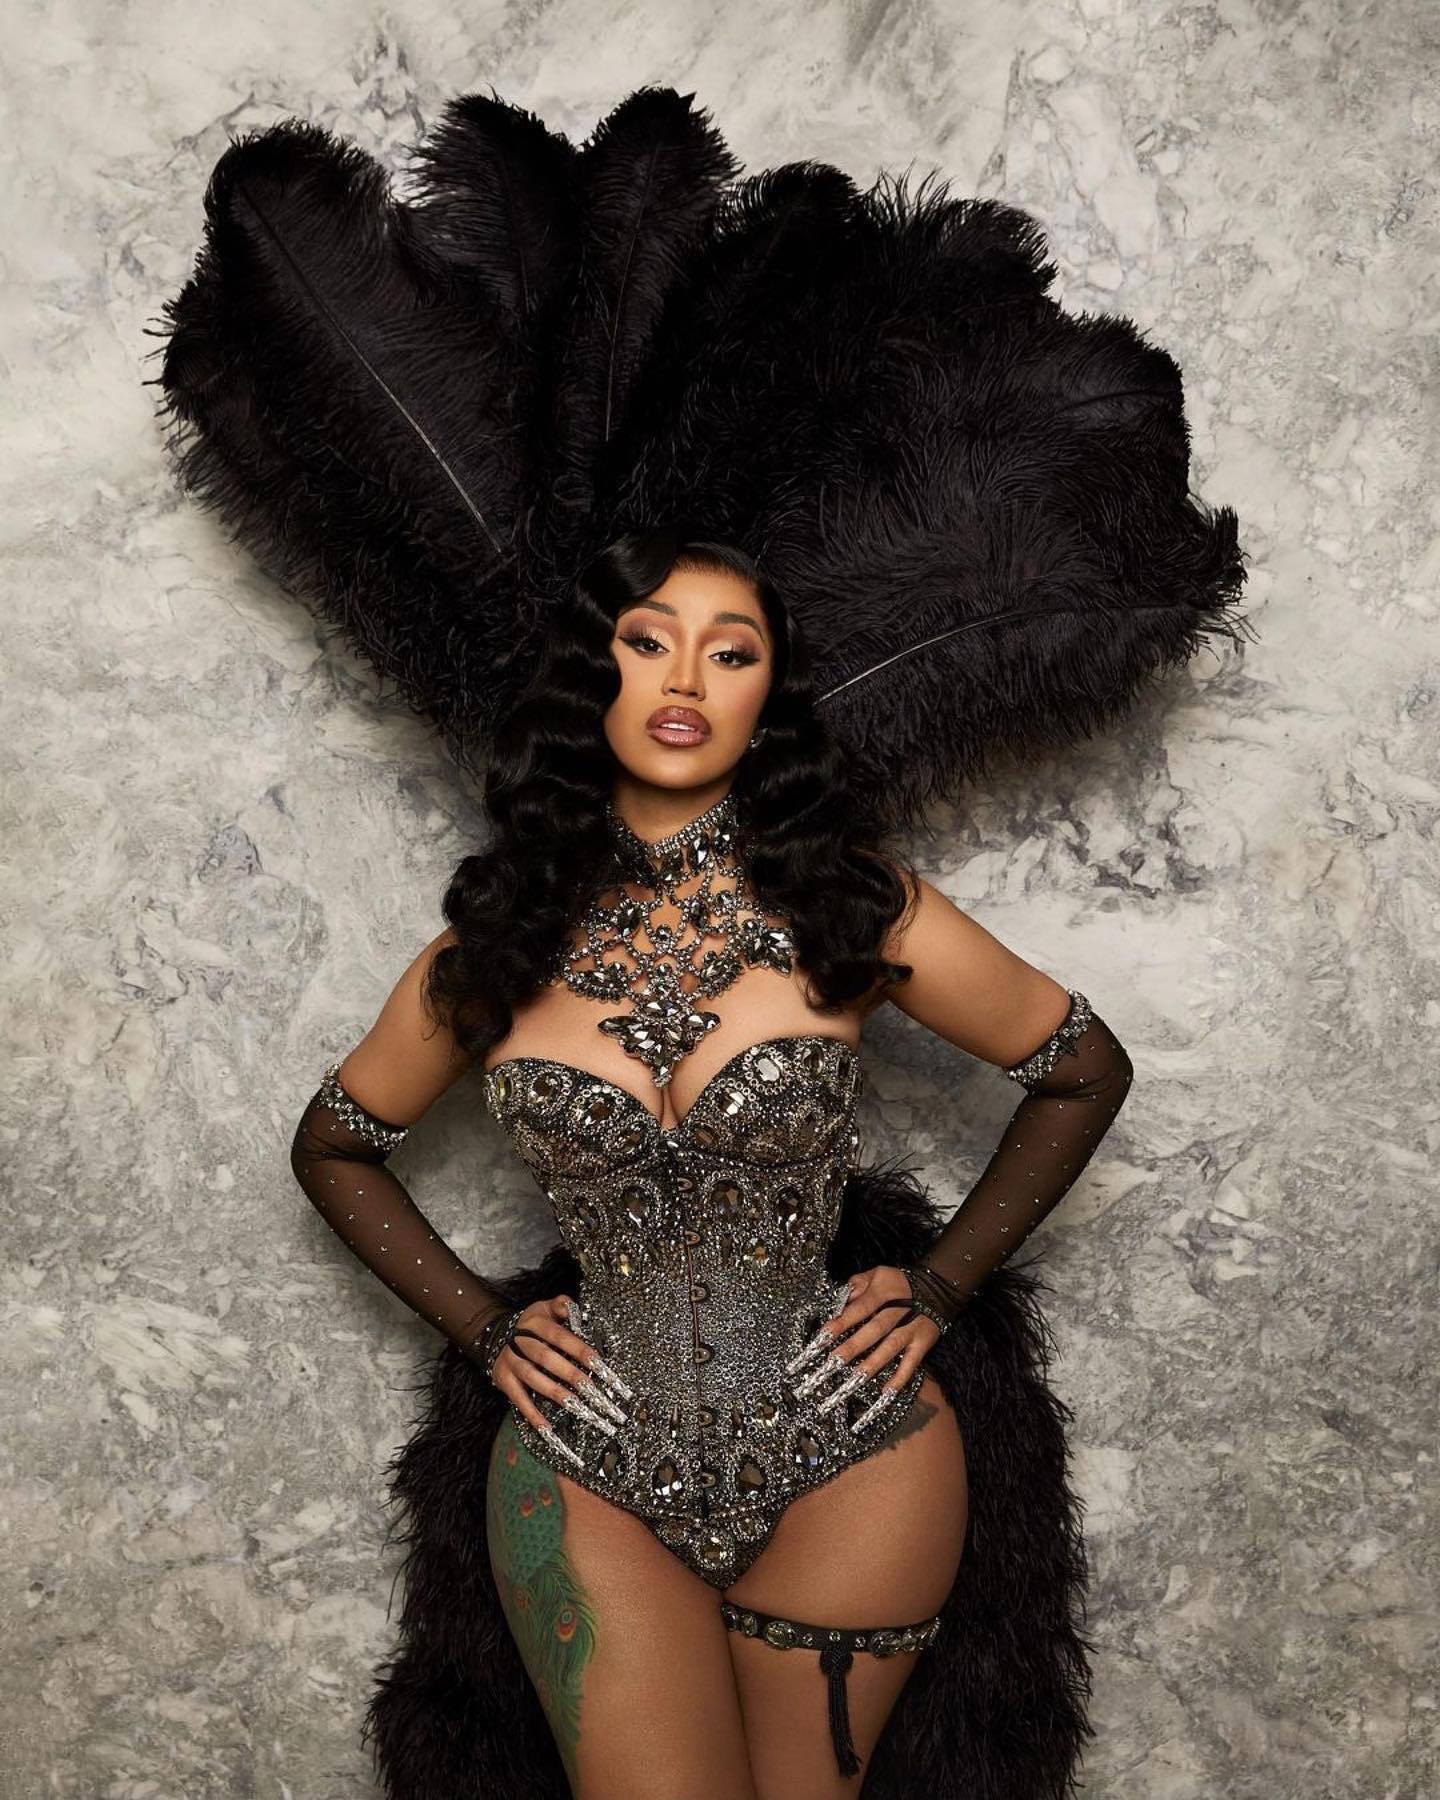 The Look That Almost Was: Cardi B Reveals a Second Burlesque Look that  Didn't Make It to Her Party – Fashion Bomb Daily